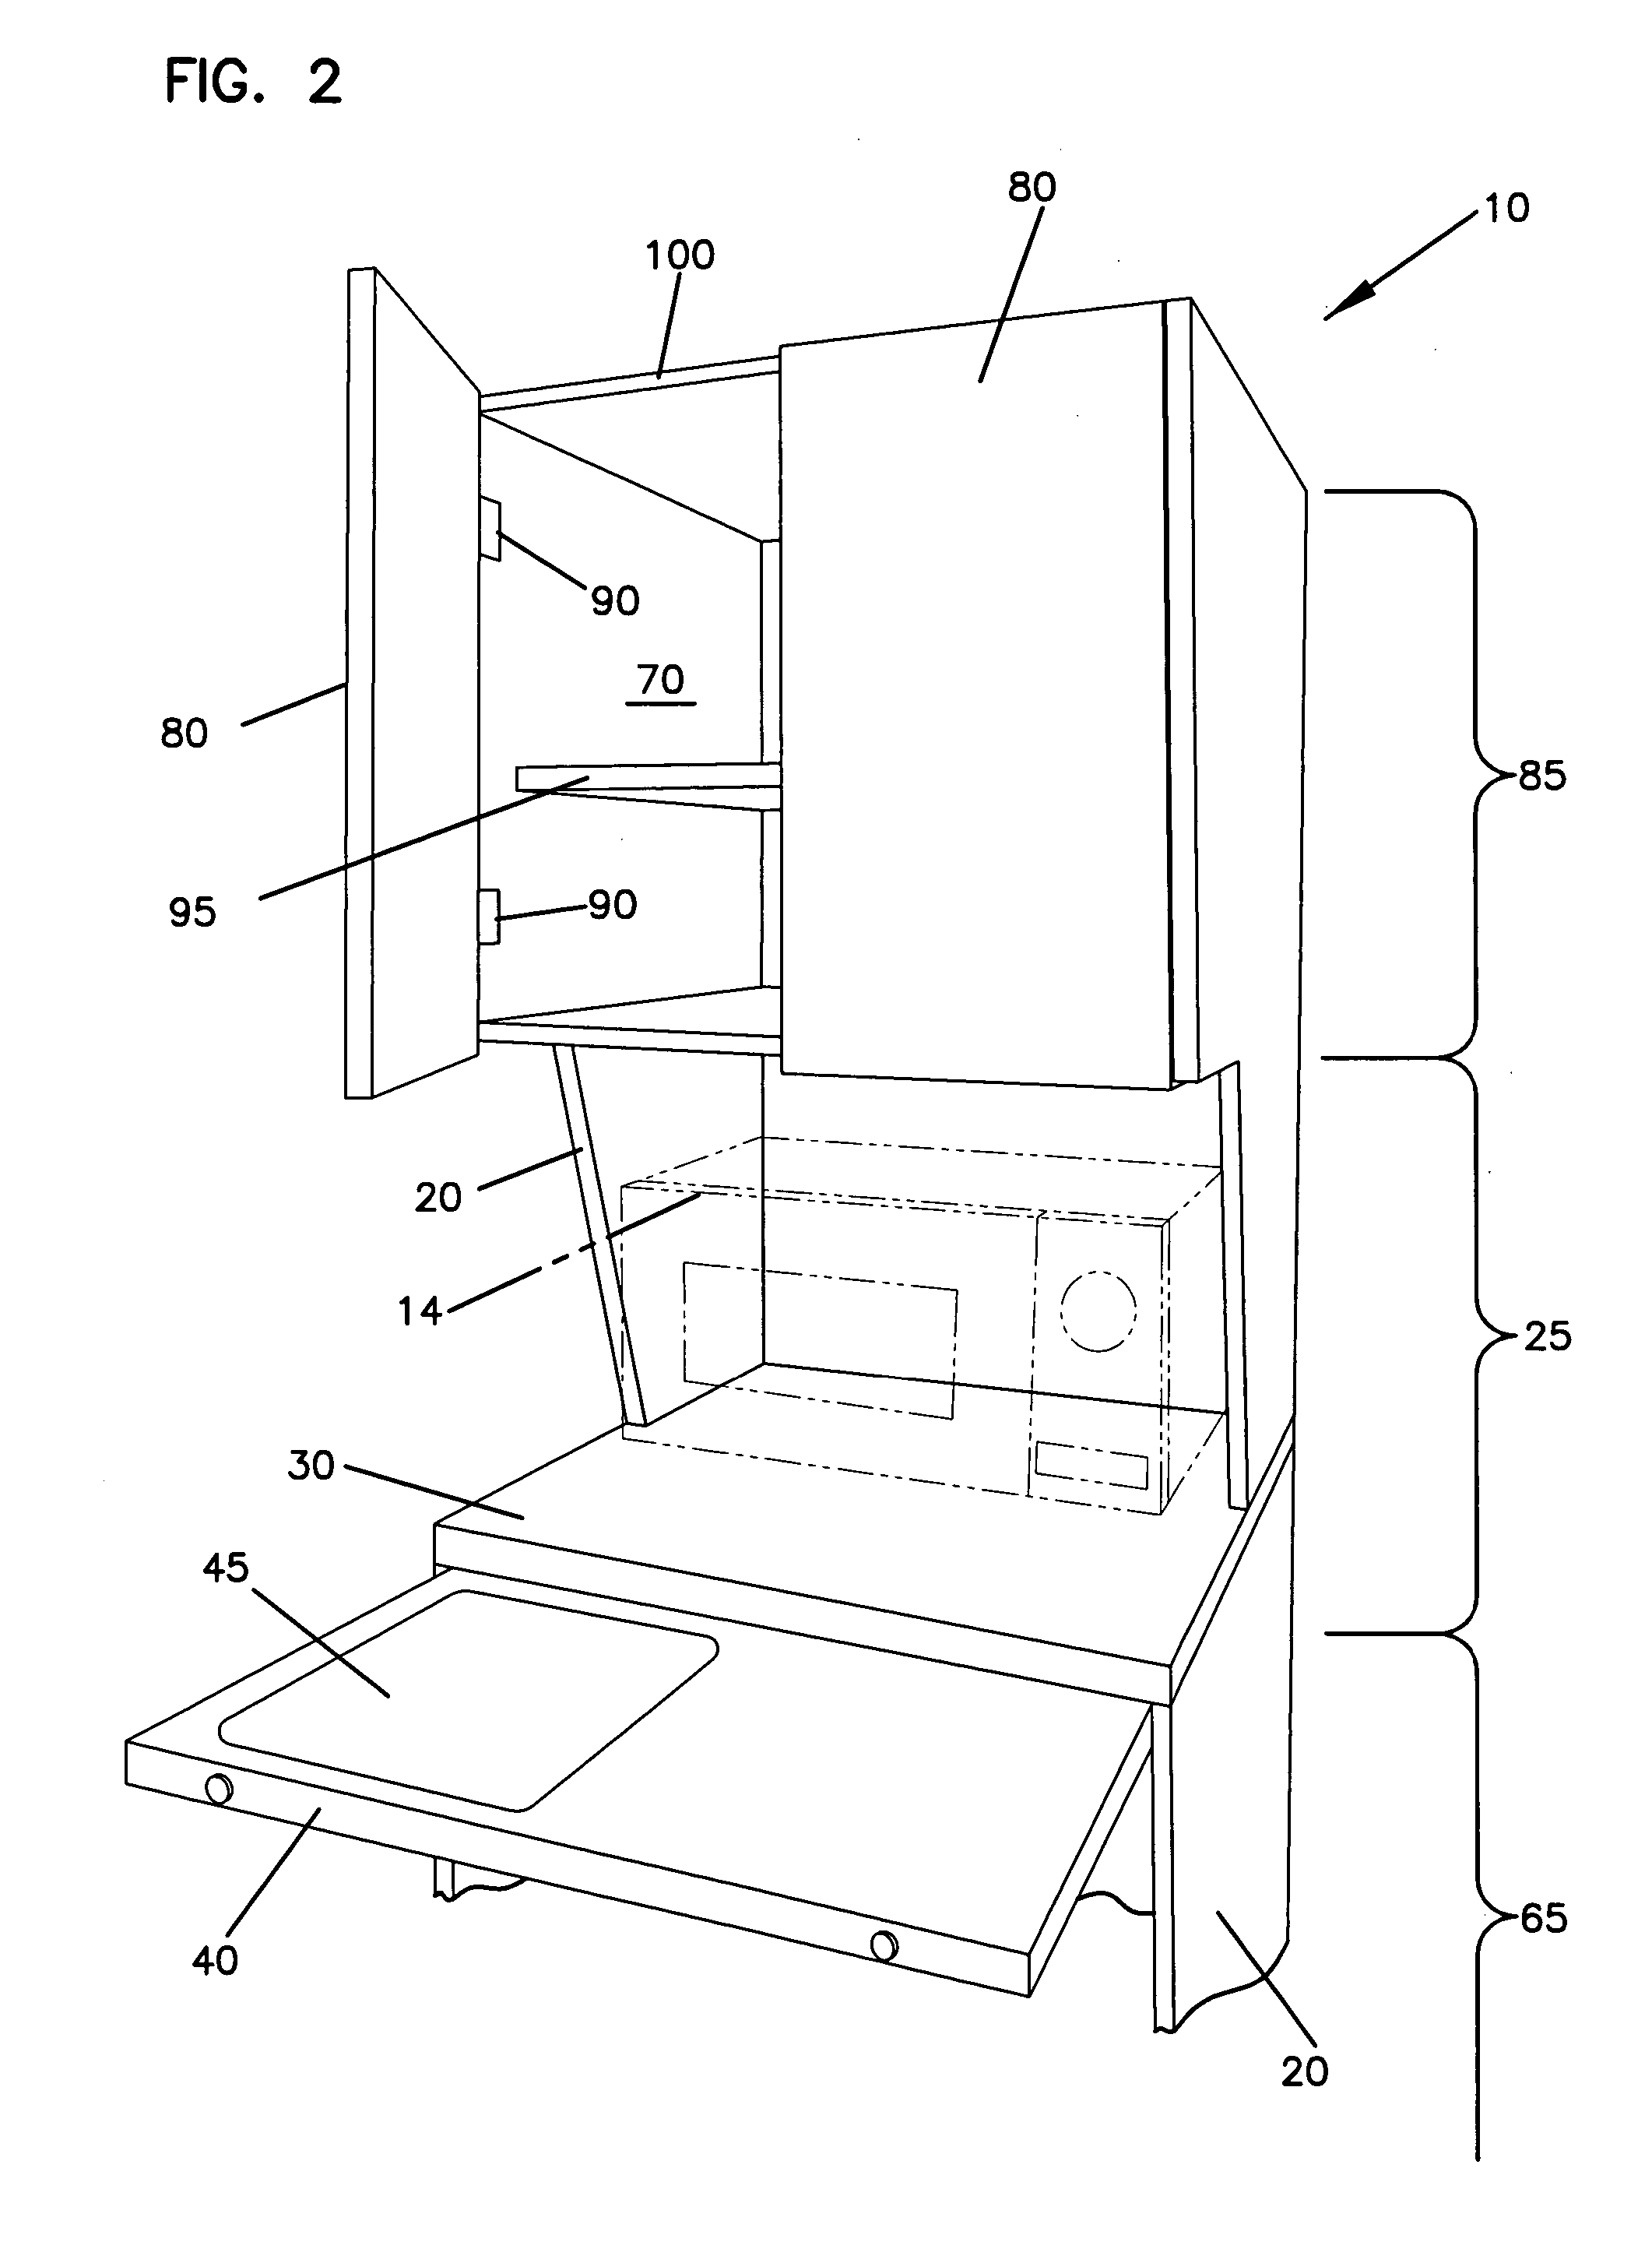 Cabinet apparatus for kitchen utensils and appliances